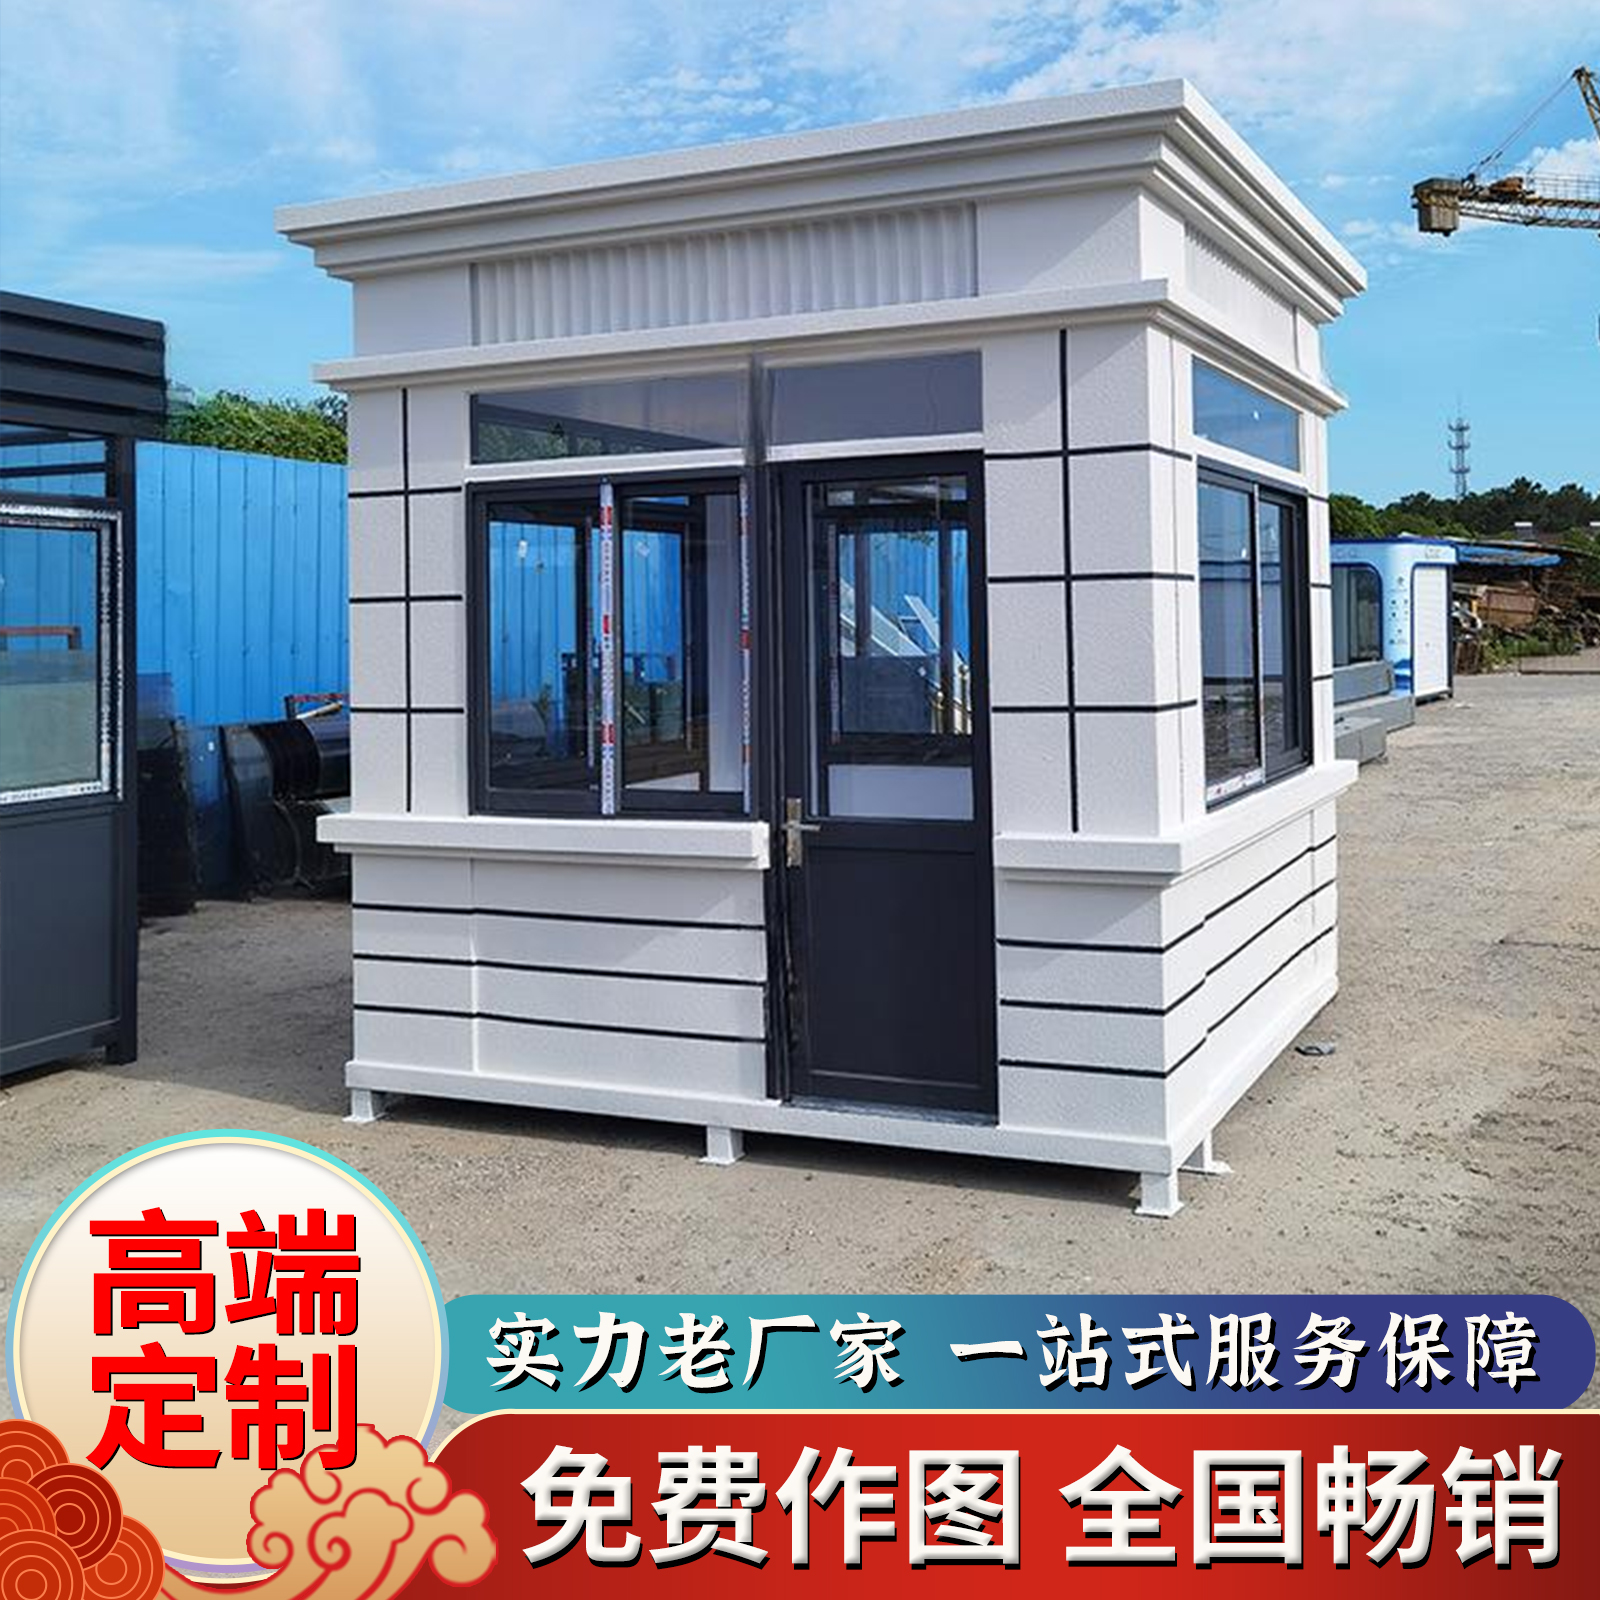 Real Stone Lacquer Senting Booth Security Kiosk Outdoor Finished Door Wei Value Class Room Property Policing Duty Room Manufacturer Direct-Taobao